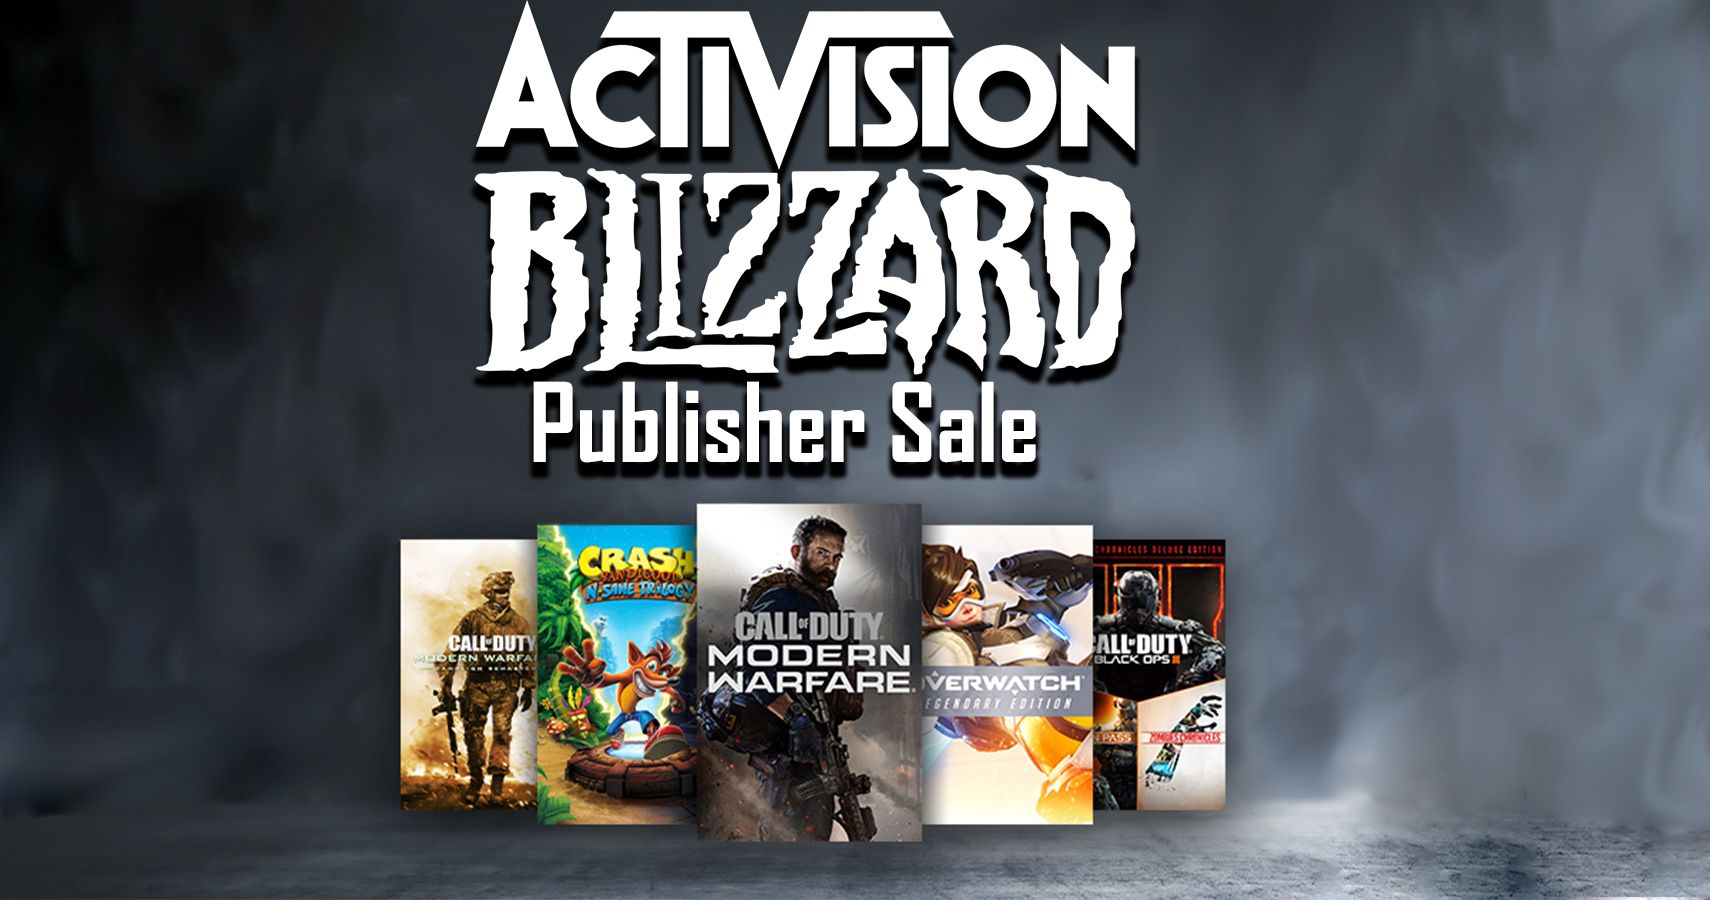 Activision Blizzard Xbox Games On Sale, Includes Modern Warfare And